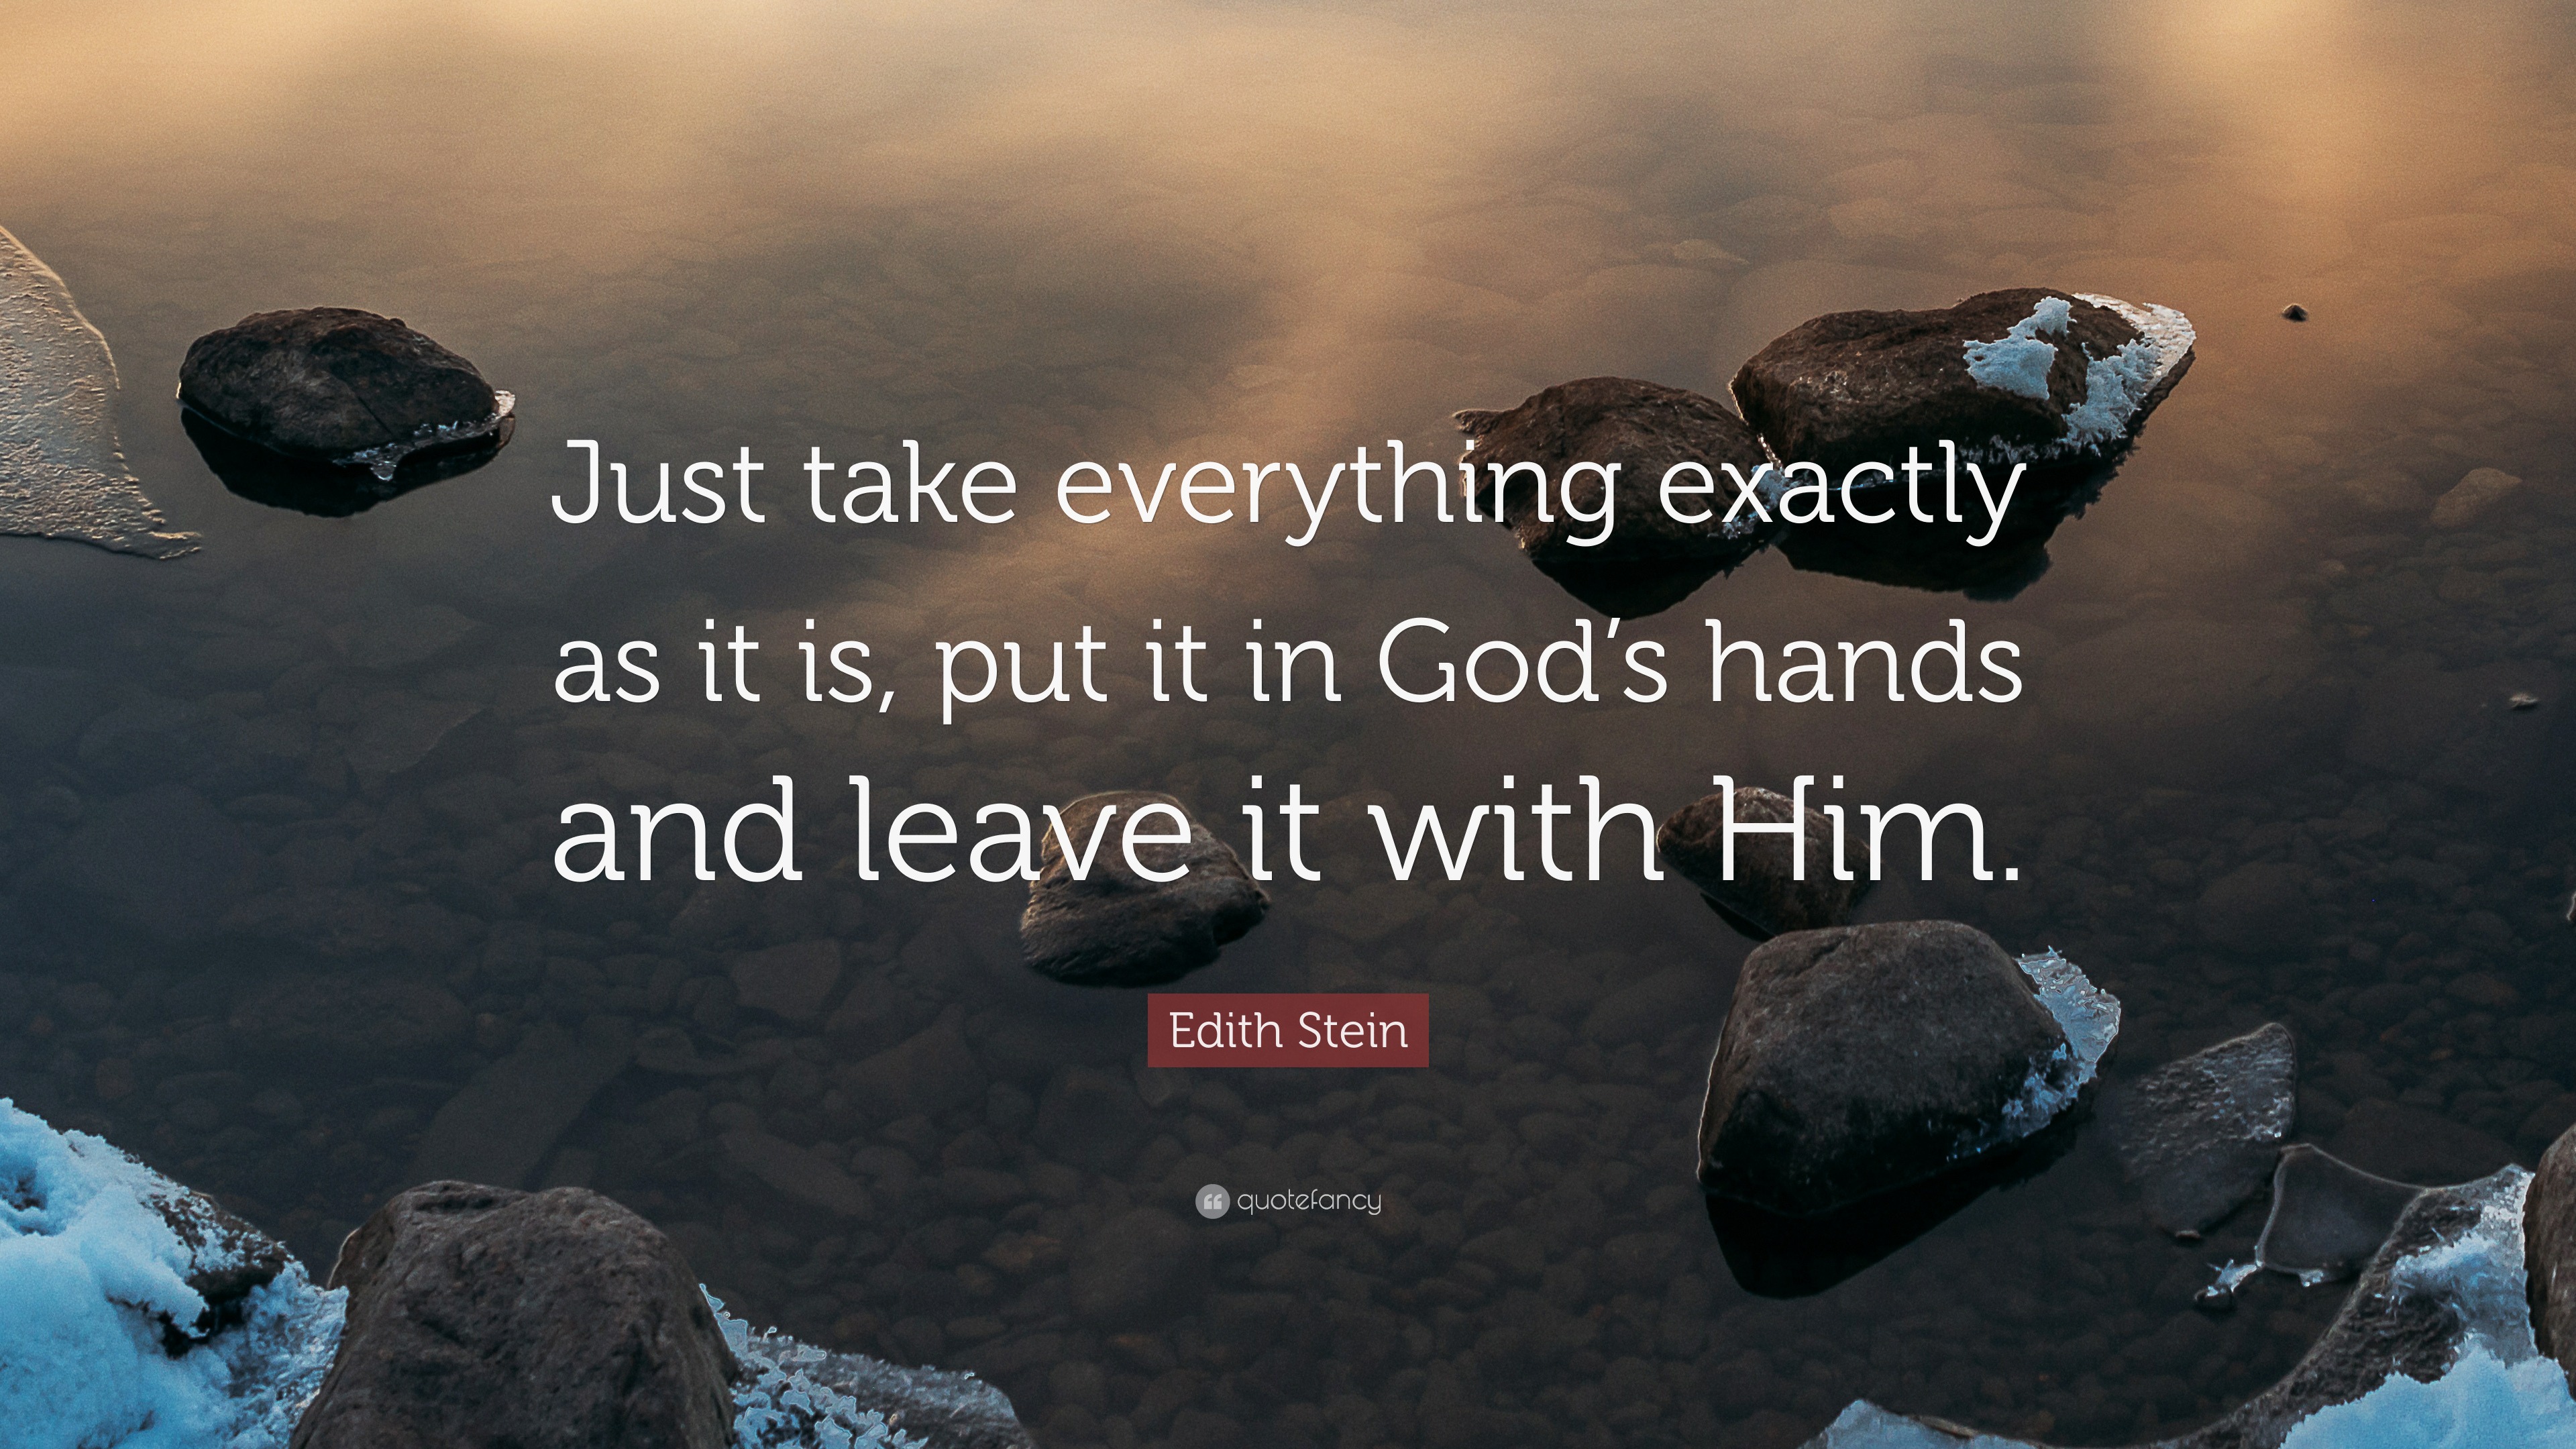 Edith Stein Quote: “Just take everything exactly as it is, put it in